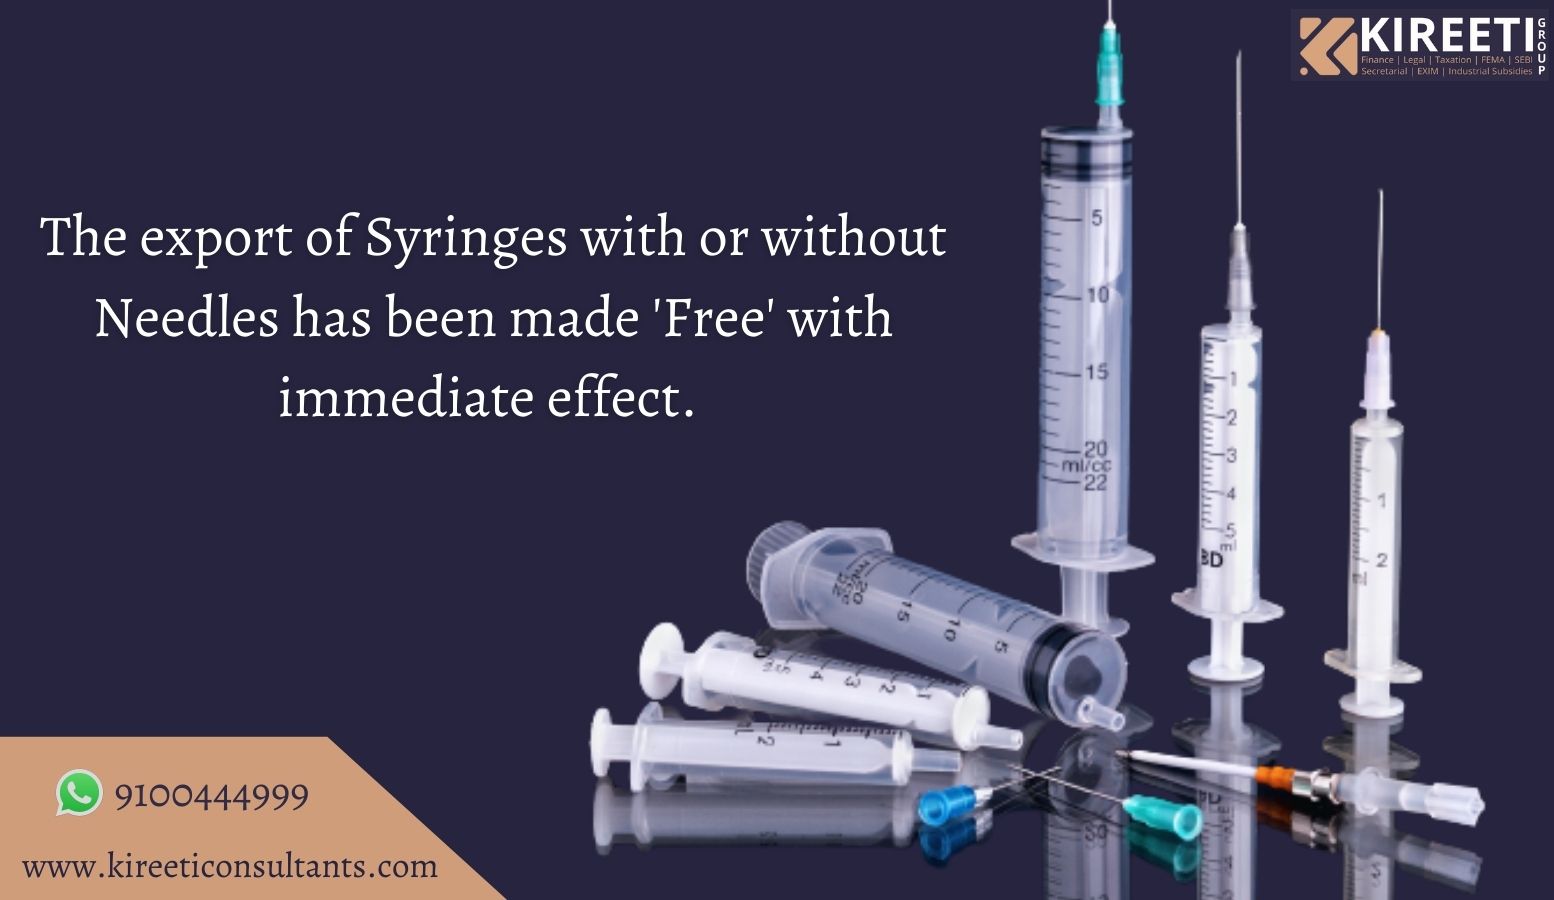 export, import, syringes, injections, disposable syringes, needles, dgft, trade notice, kireeti consultants, kcgroup